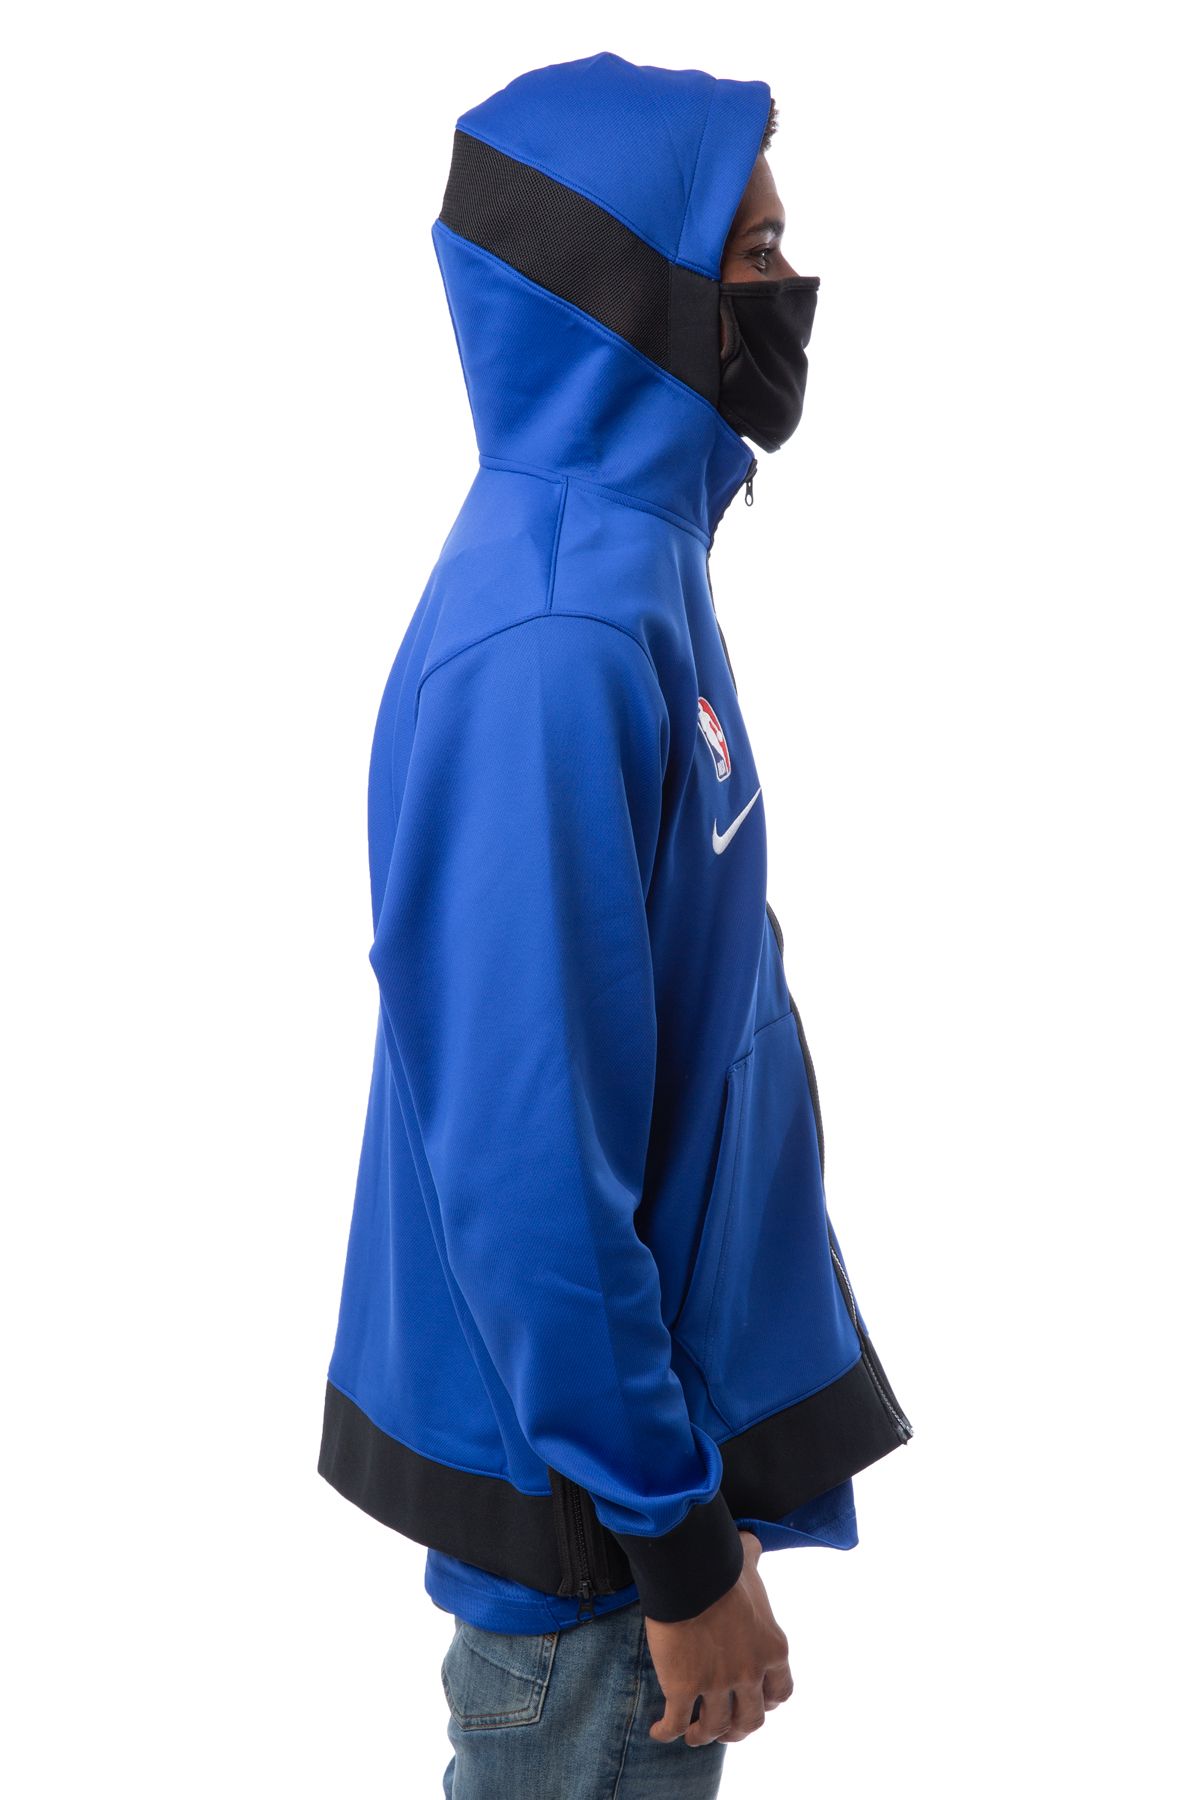 NIKE Los Angeles Clippers Showtime Jacket CN4032 495 - Shiekh